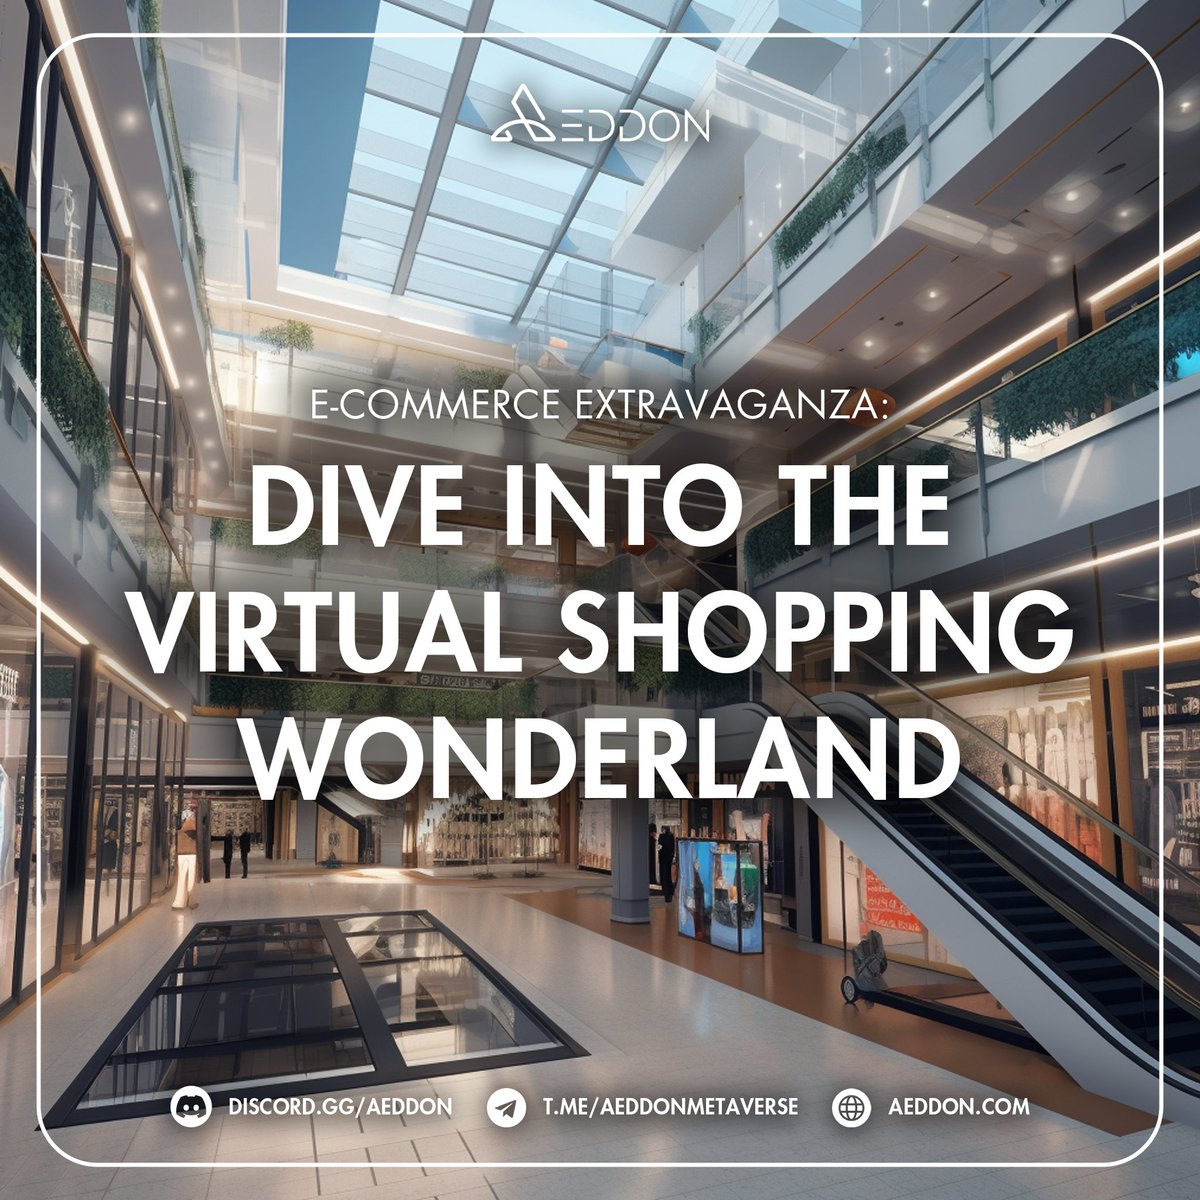 #AeddonMetaverse takes e-commerce to the next level with its virtual Shopping Wonderland.
Discover a world where you can explore and shop from the comfort of your own home.
Get ready for an #ECommerceExtravaganza like never before!
🛍️💫 #VirtualShopping #Metaverse